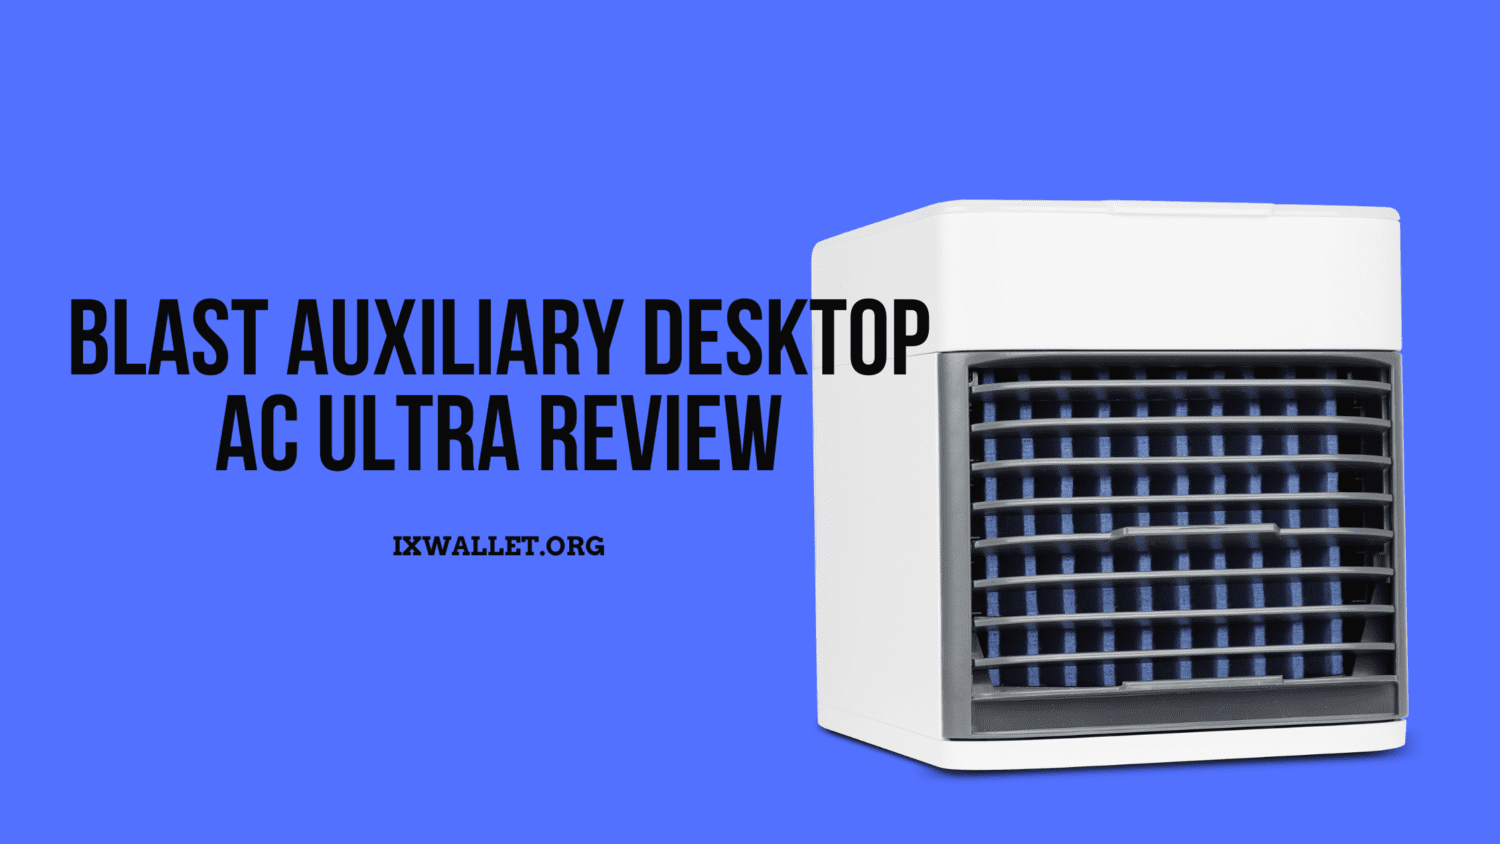 An image with Blast Auxiliary Desktop AC ultra review at IXWallet.org